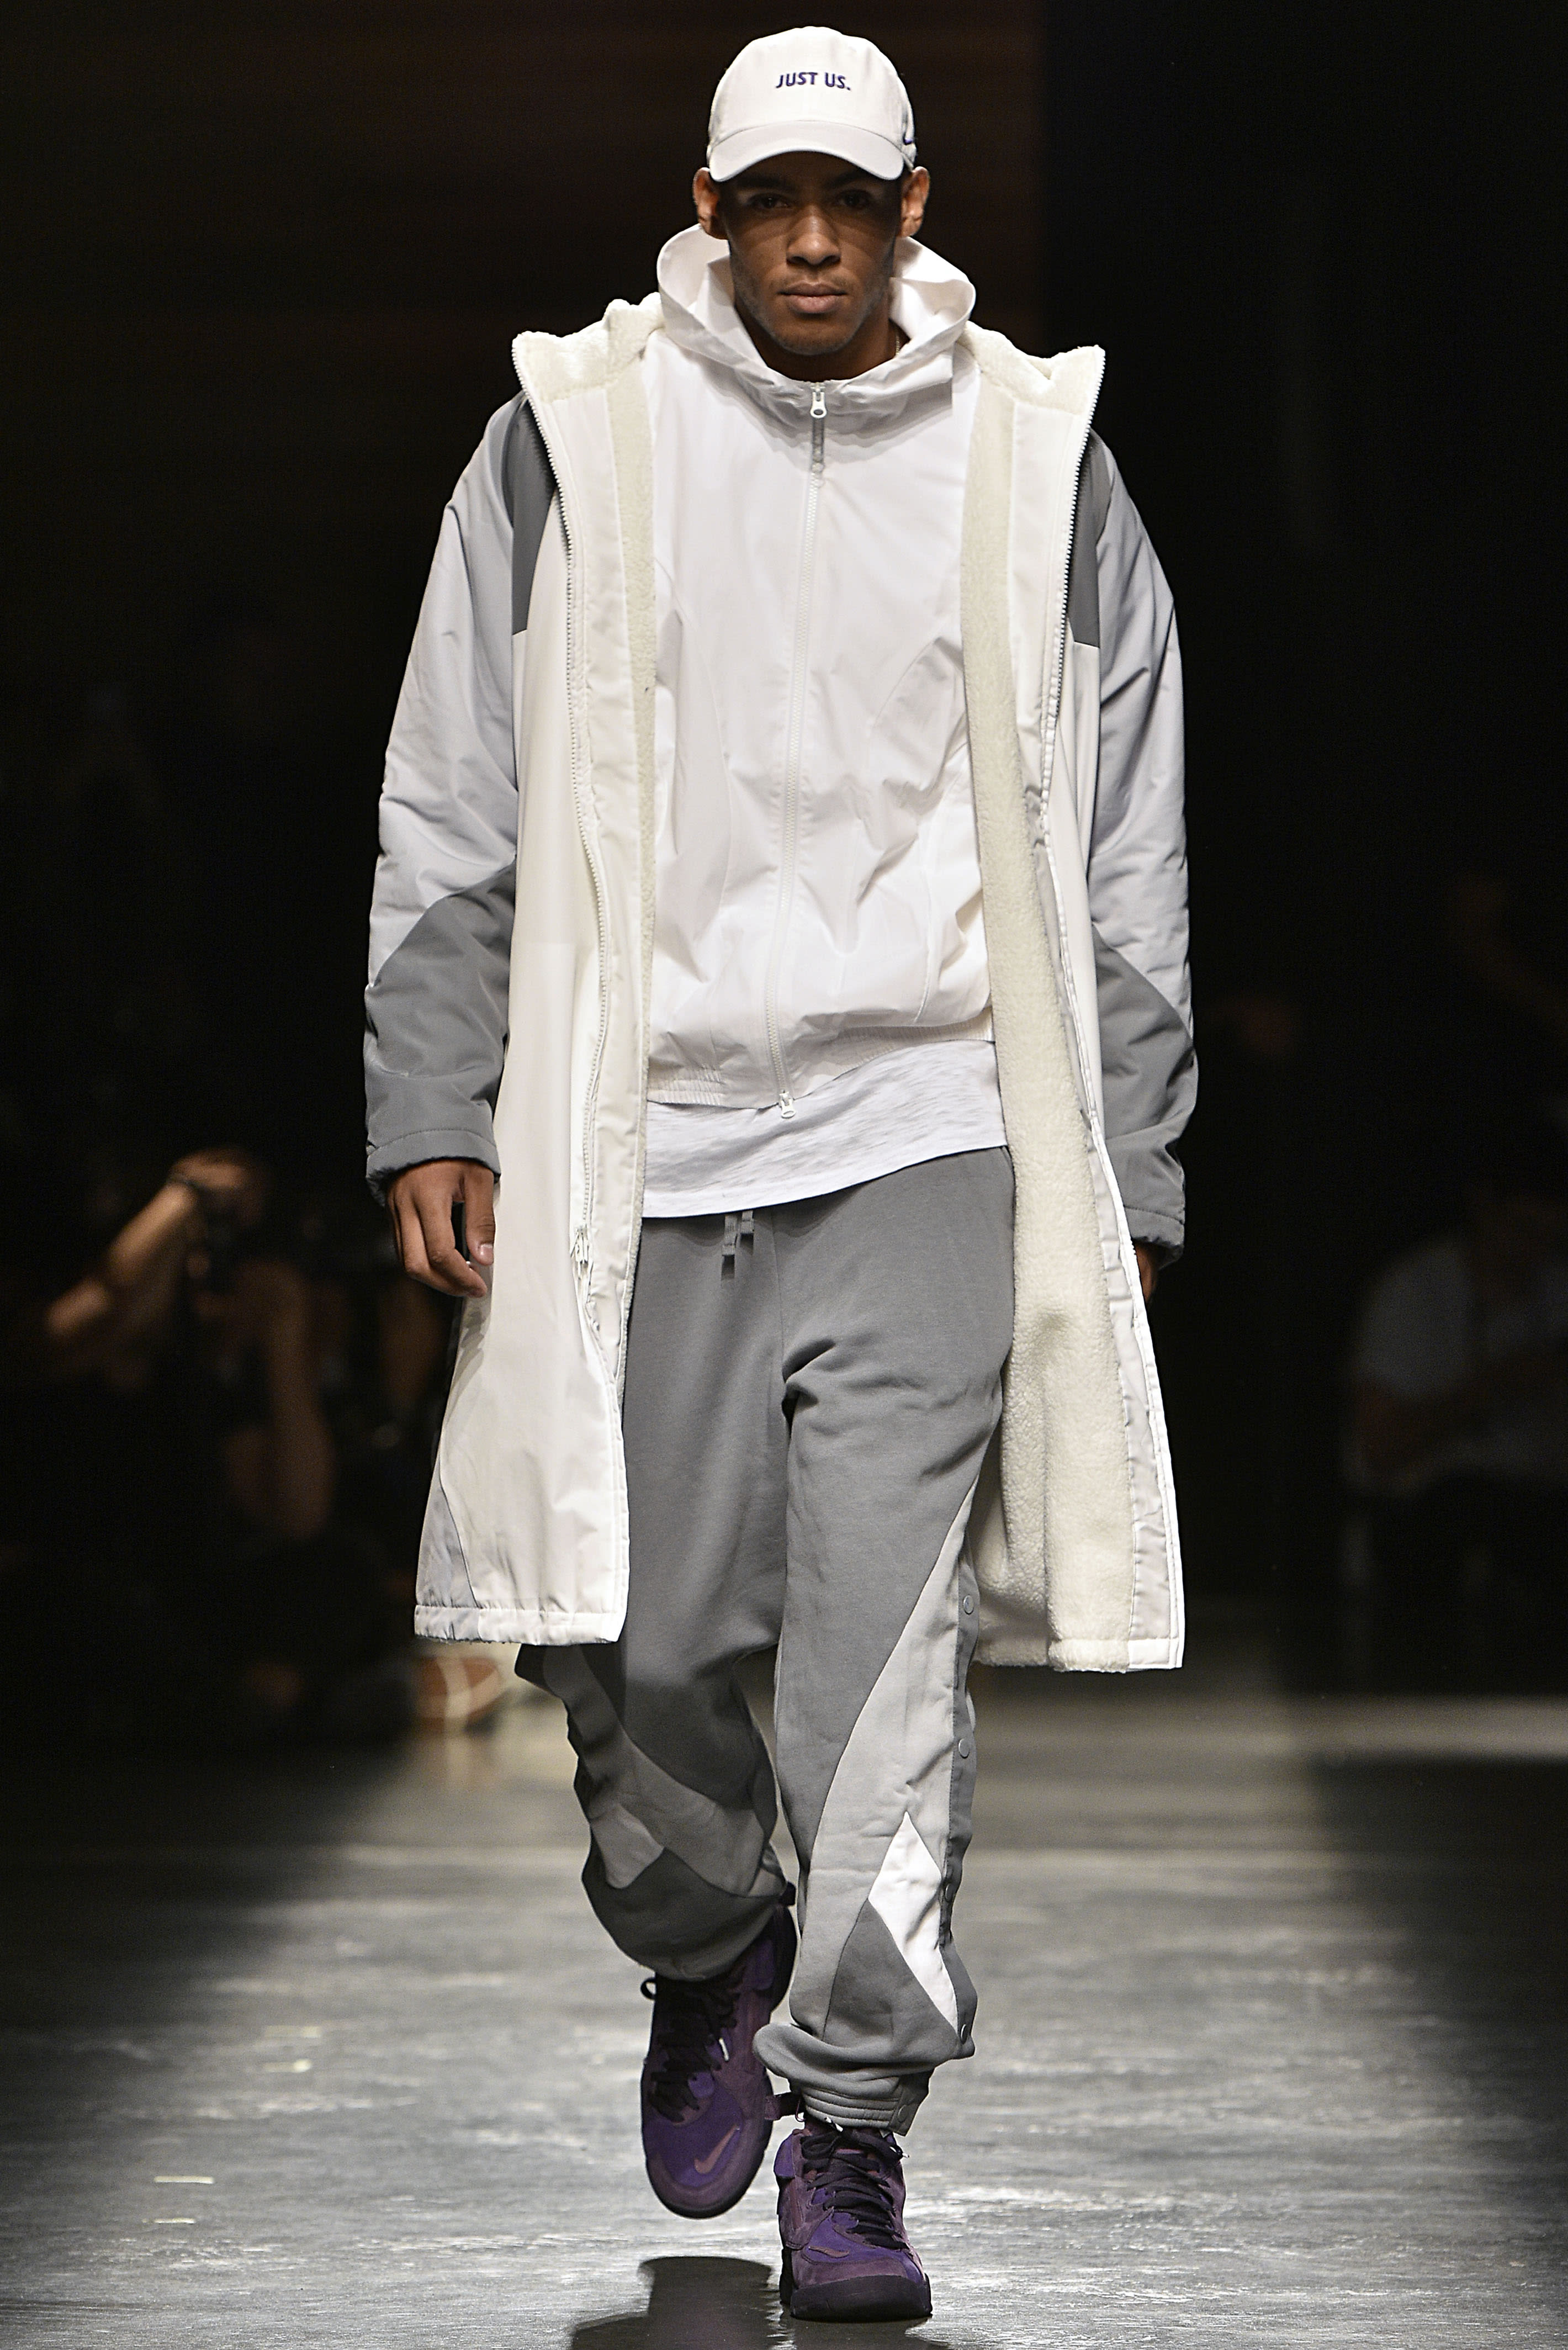 Here's a Better Look at Kith's NYFW Show | Complex